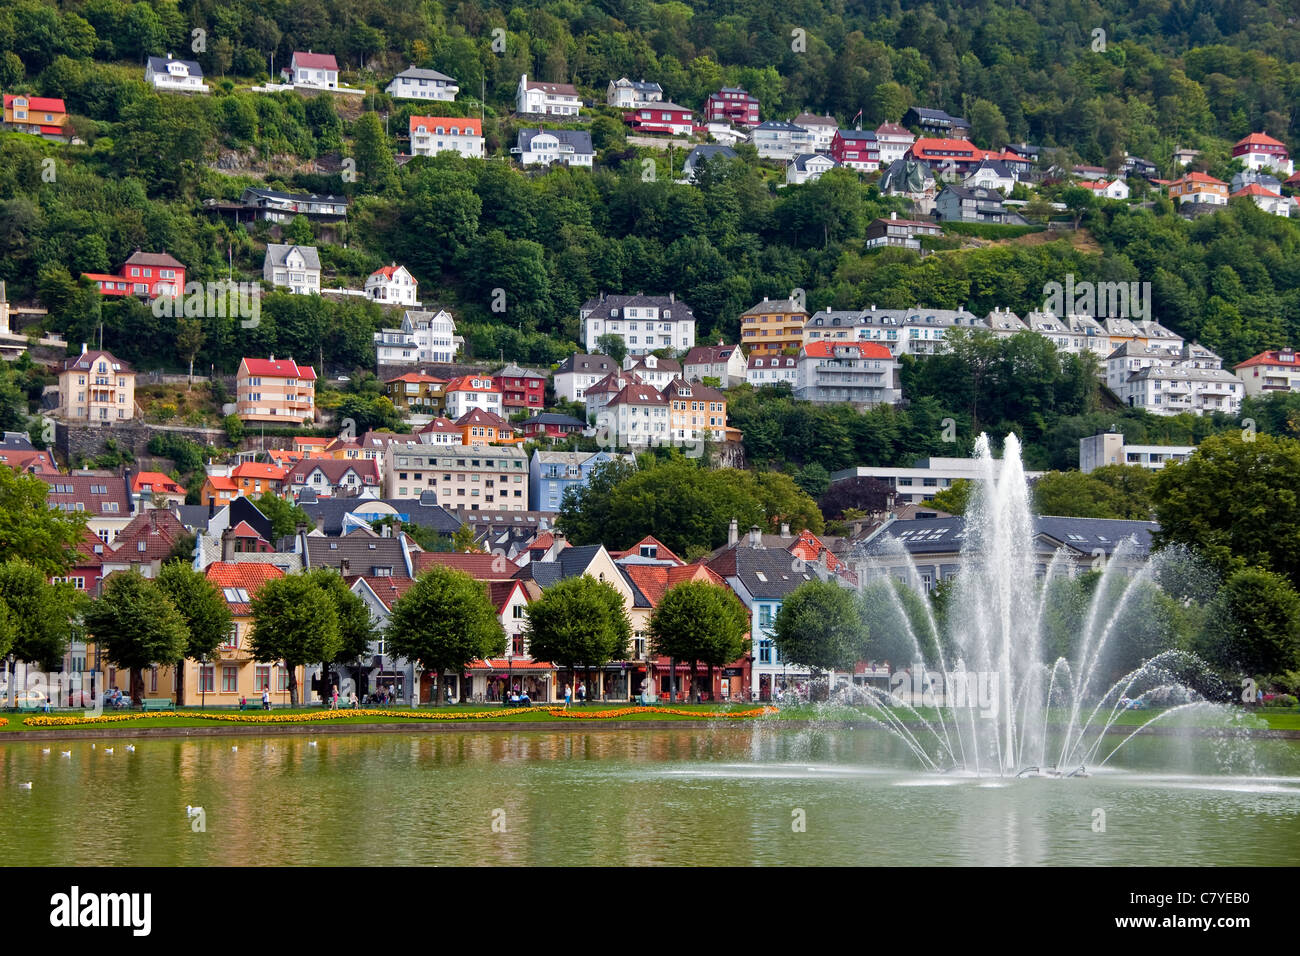 Bergen residences on Mount Floien overlooking Lille Lundegardsvann ornamental lake with fountain Stock Photo